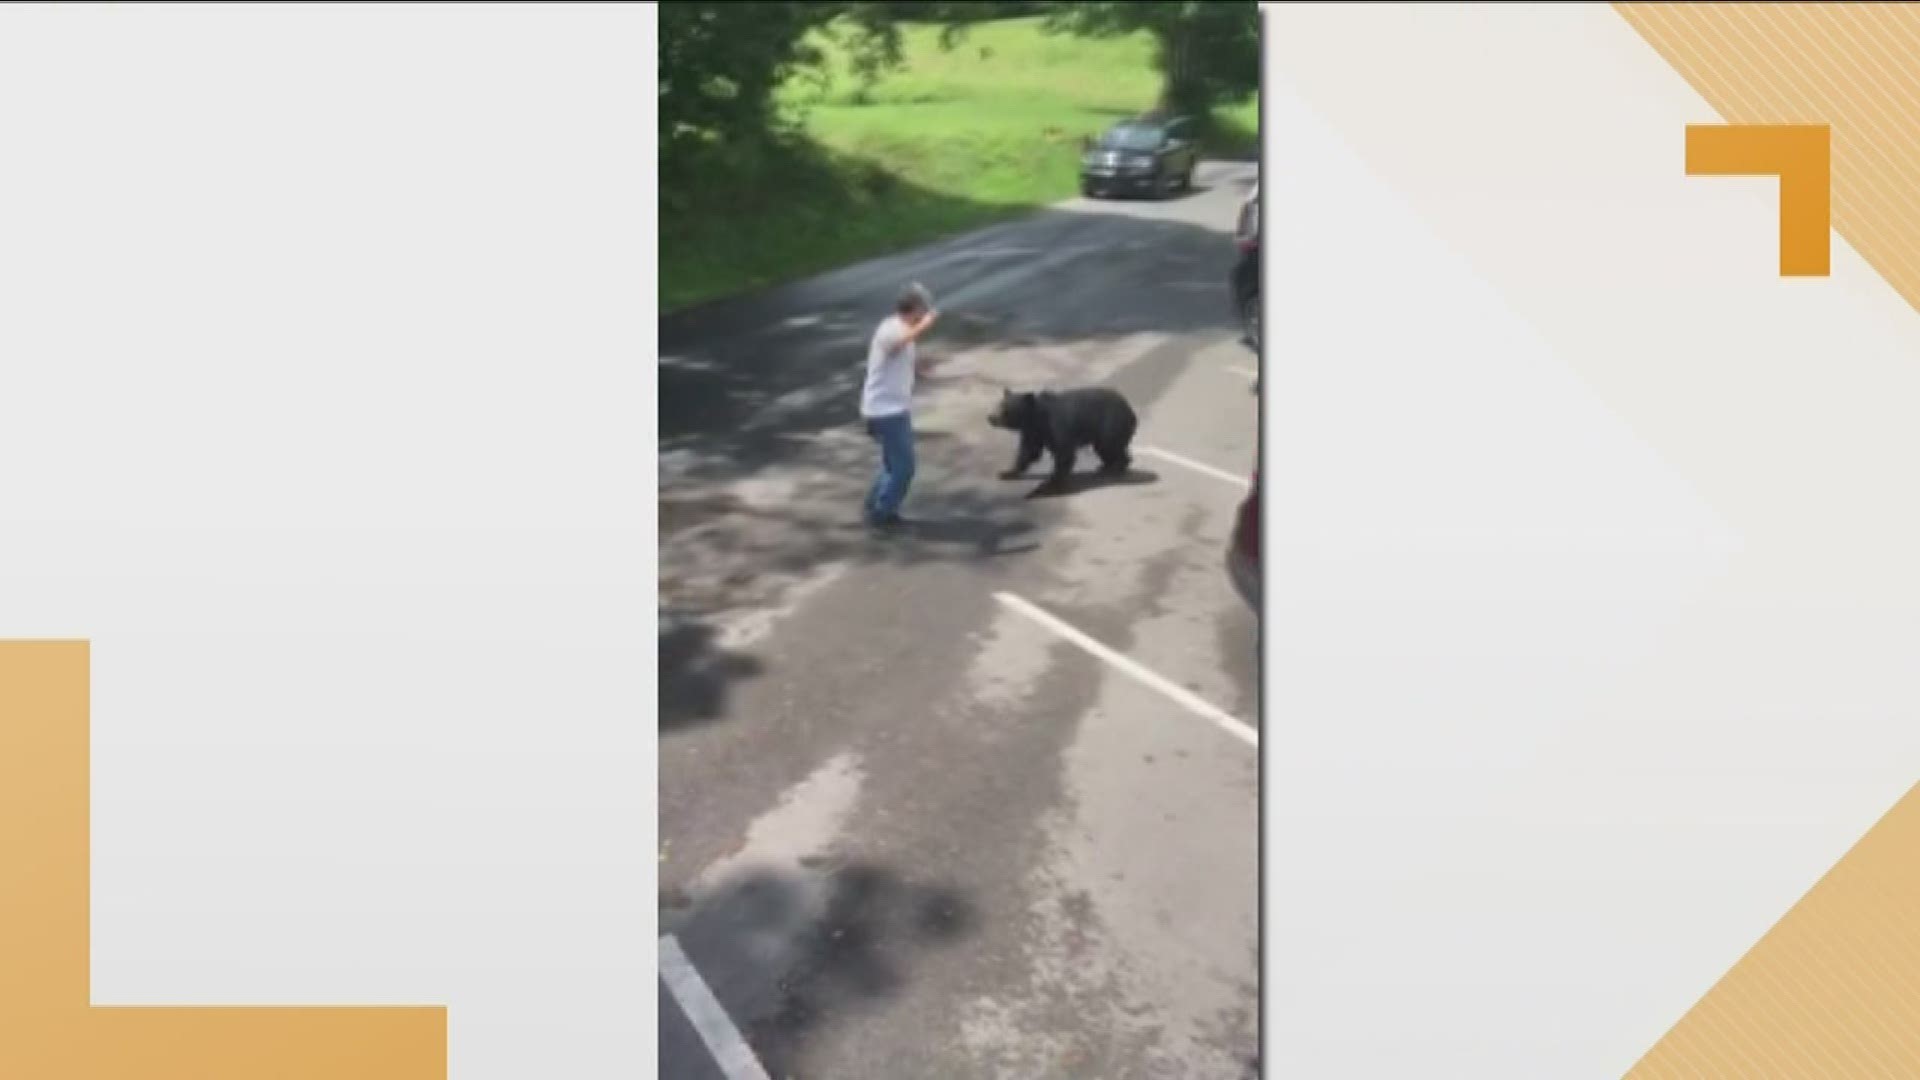 A man who gets too close to a mother bear and her bear cubs catches the unwanted attention of the mama bear. Authorities warned the confrontation could have been more dangerous for the man.